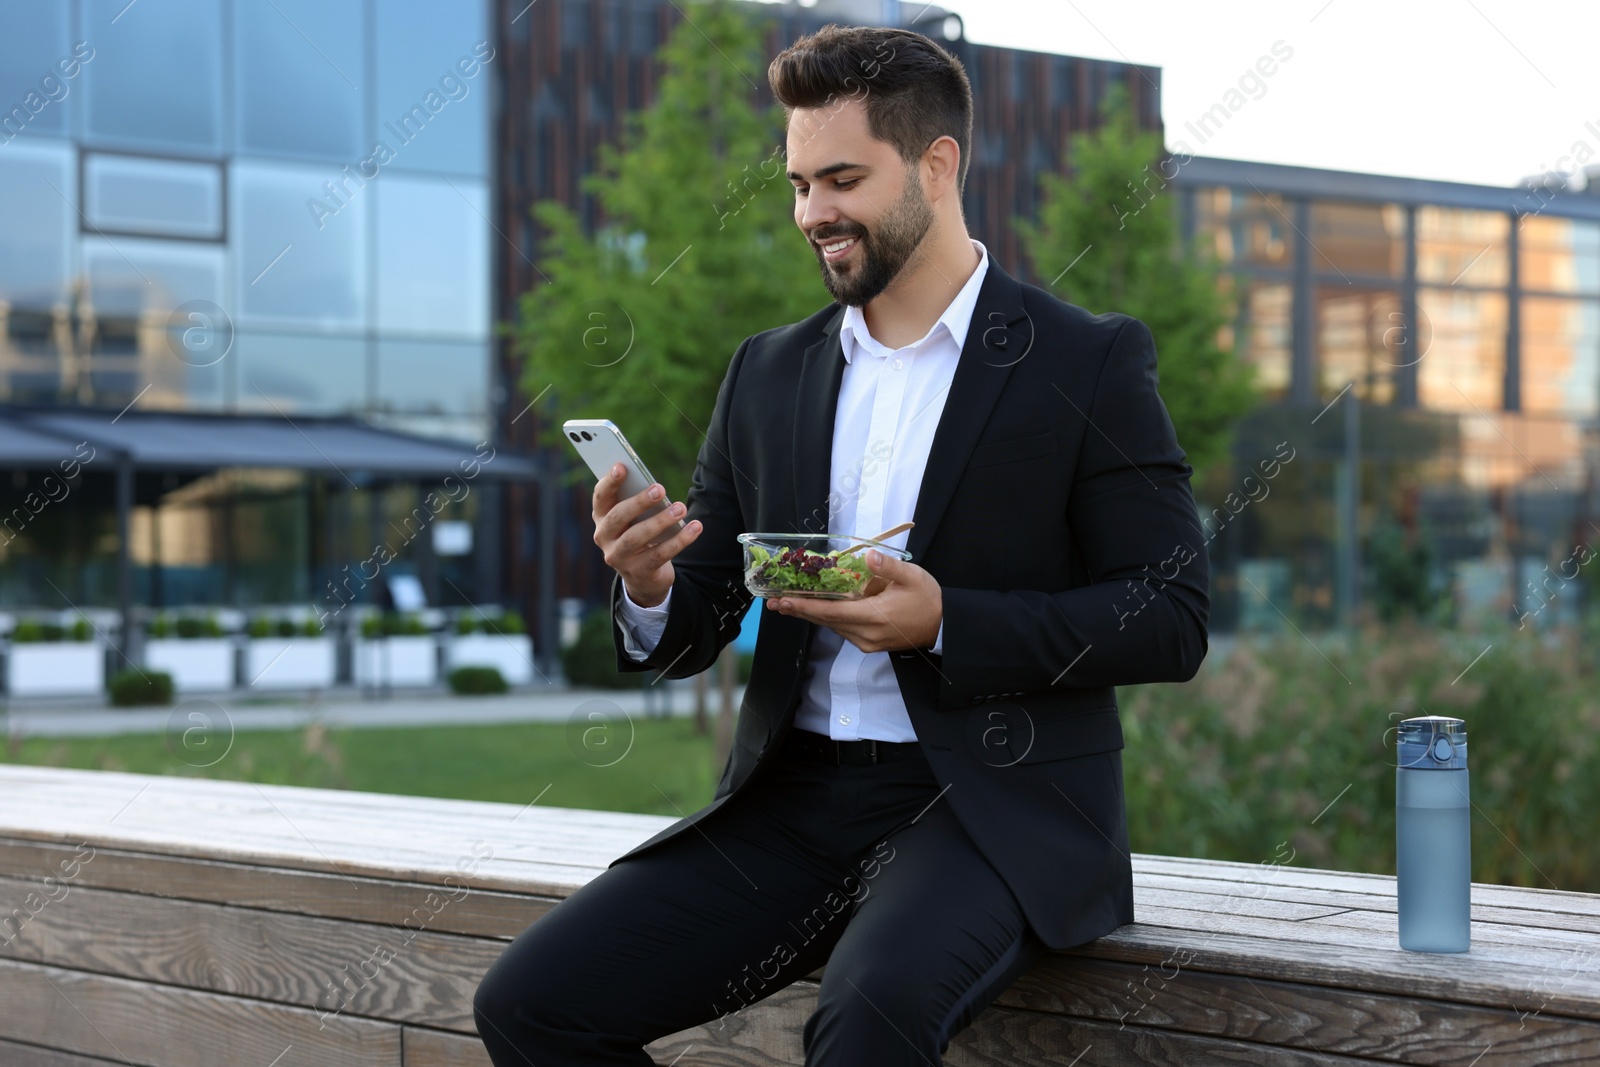 Photo of Smiling businessman with smartphone during lunch outdoors